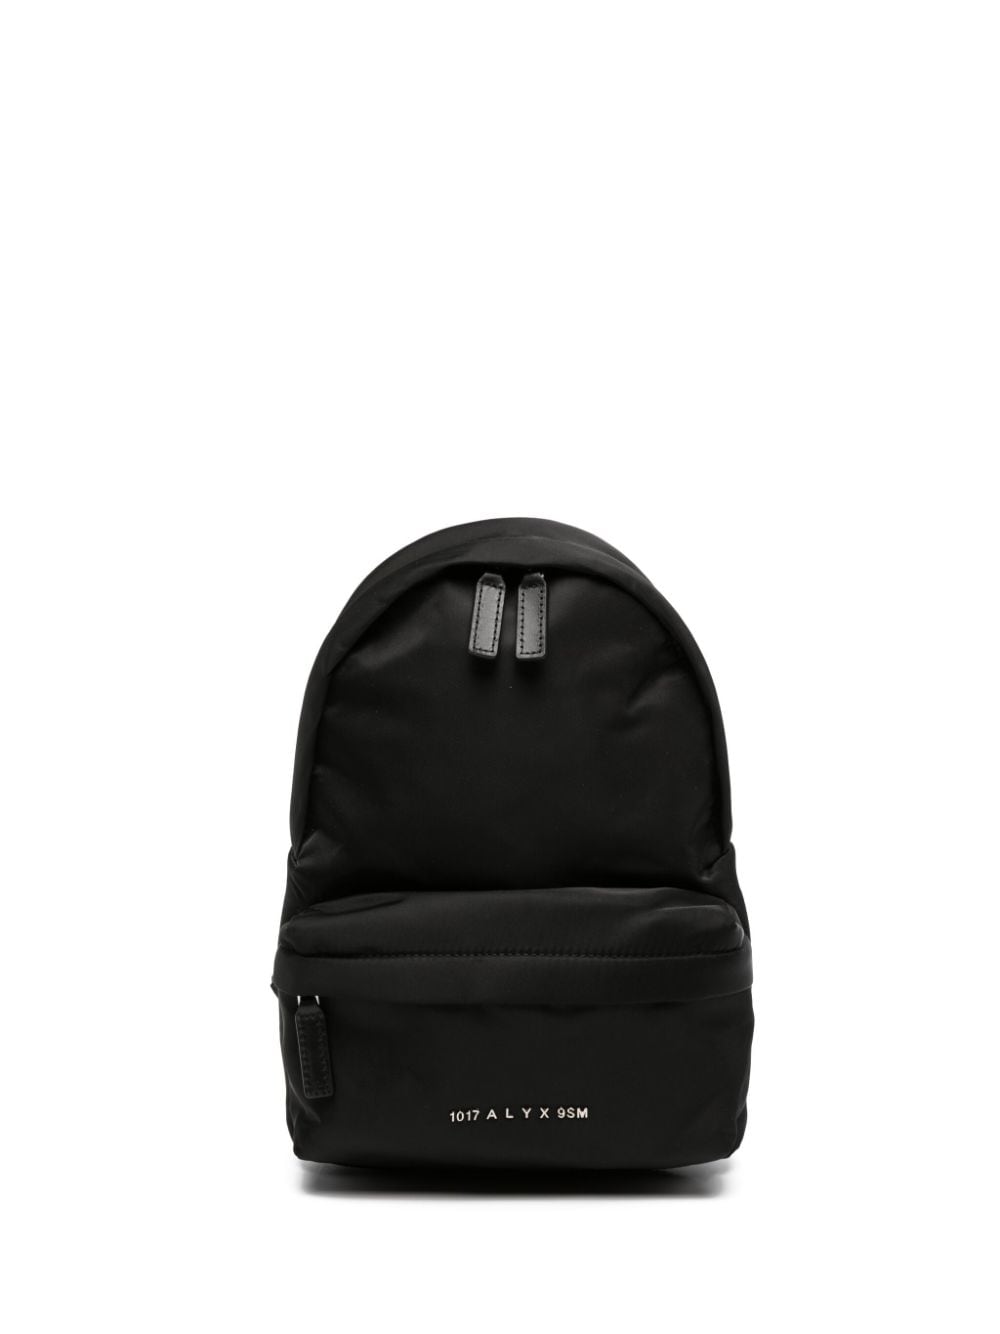 1017 ALYX 9SM logo-lettering Leather Backpack - Farfetch